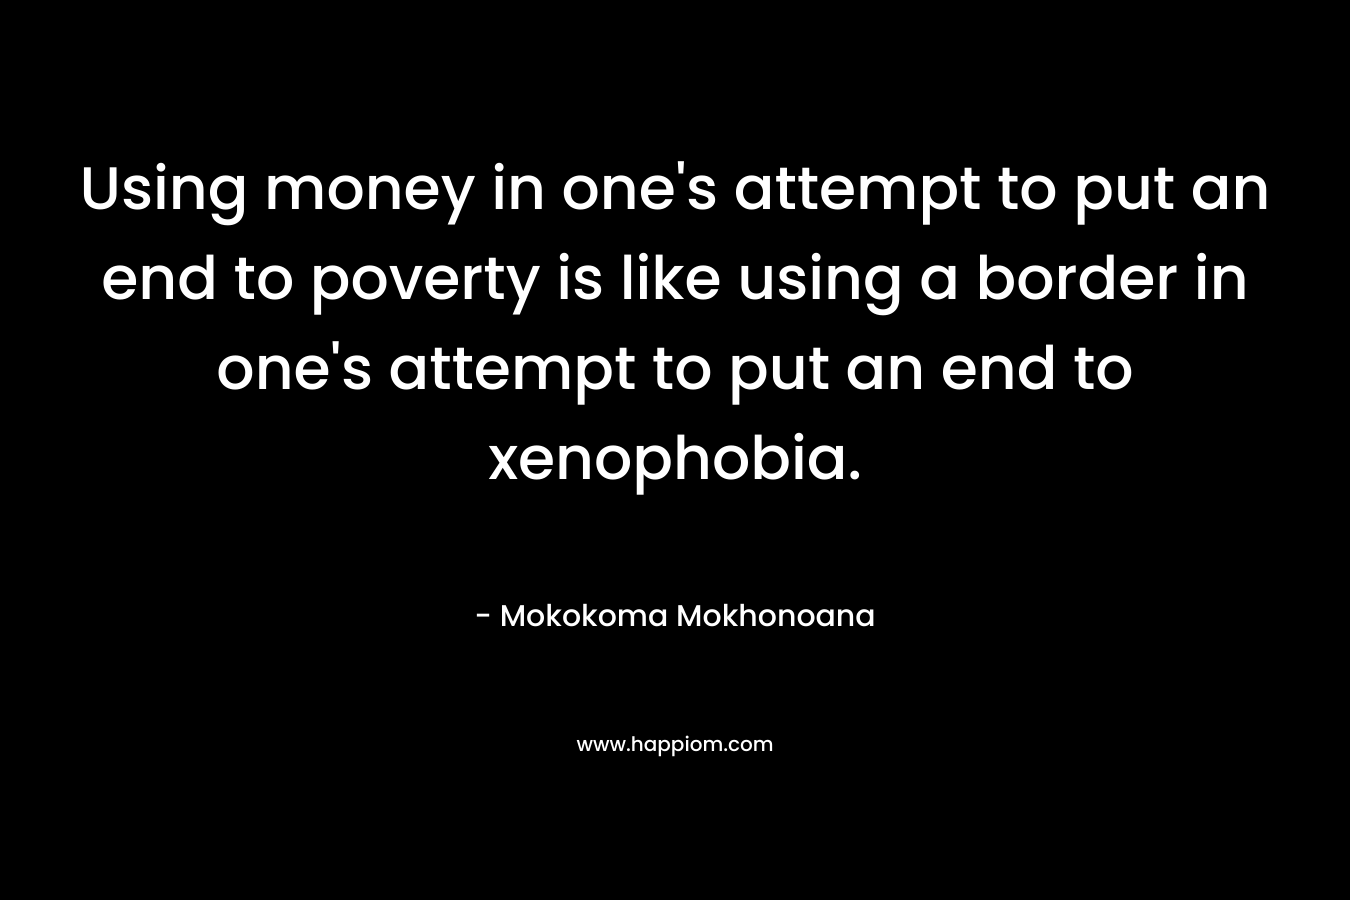 Using money in one's attempt to put an end to poverty is like using a border in one's attempt to put an end to xenophobia.